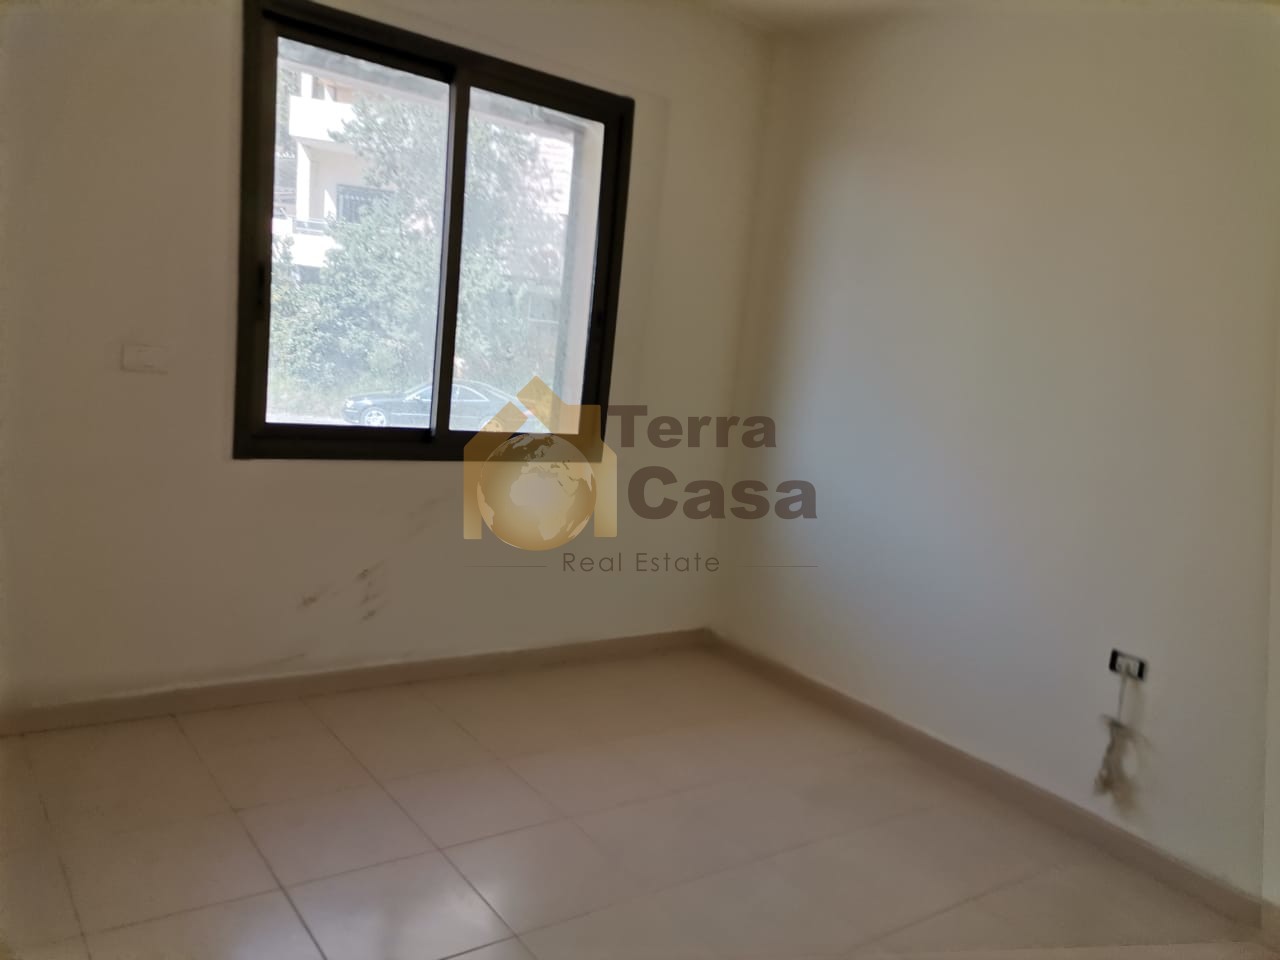 Brand new apartment for sale .Ref# 2546